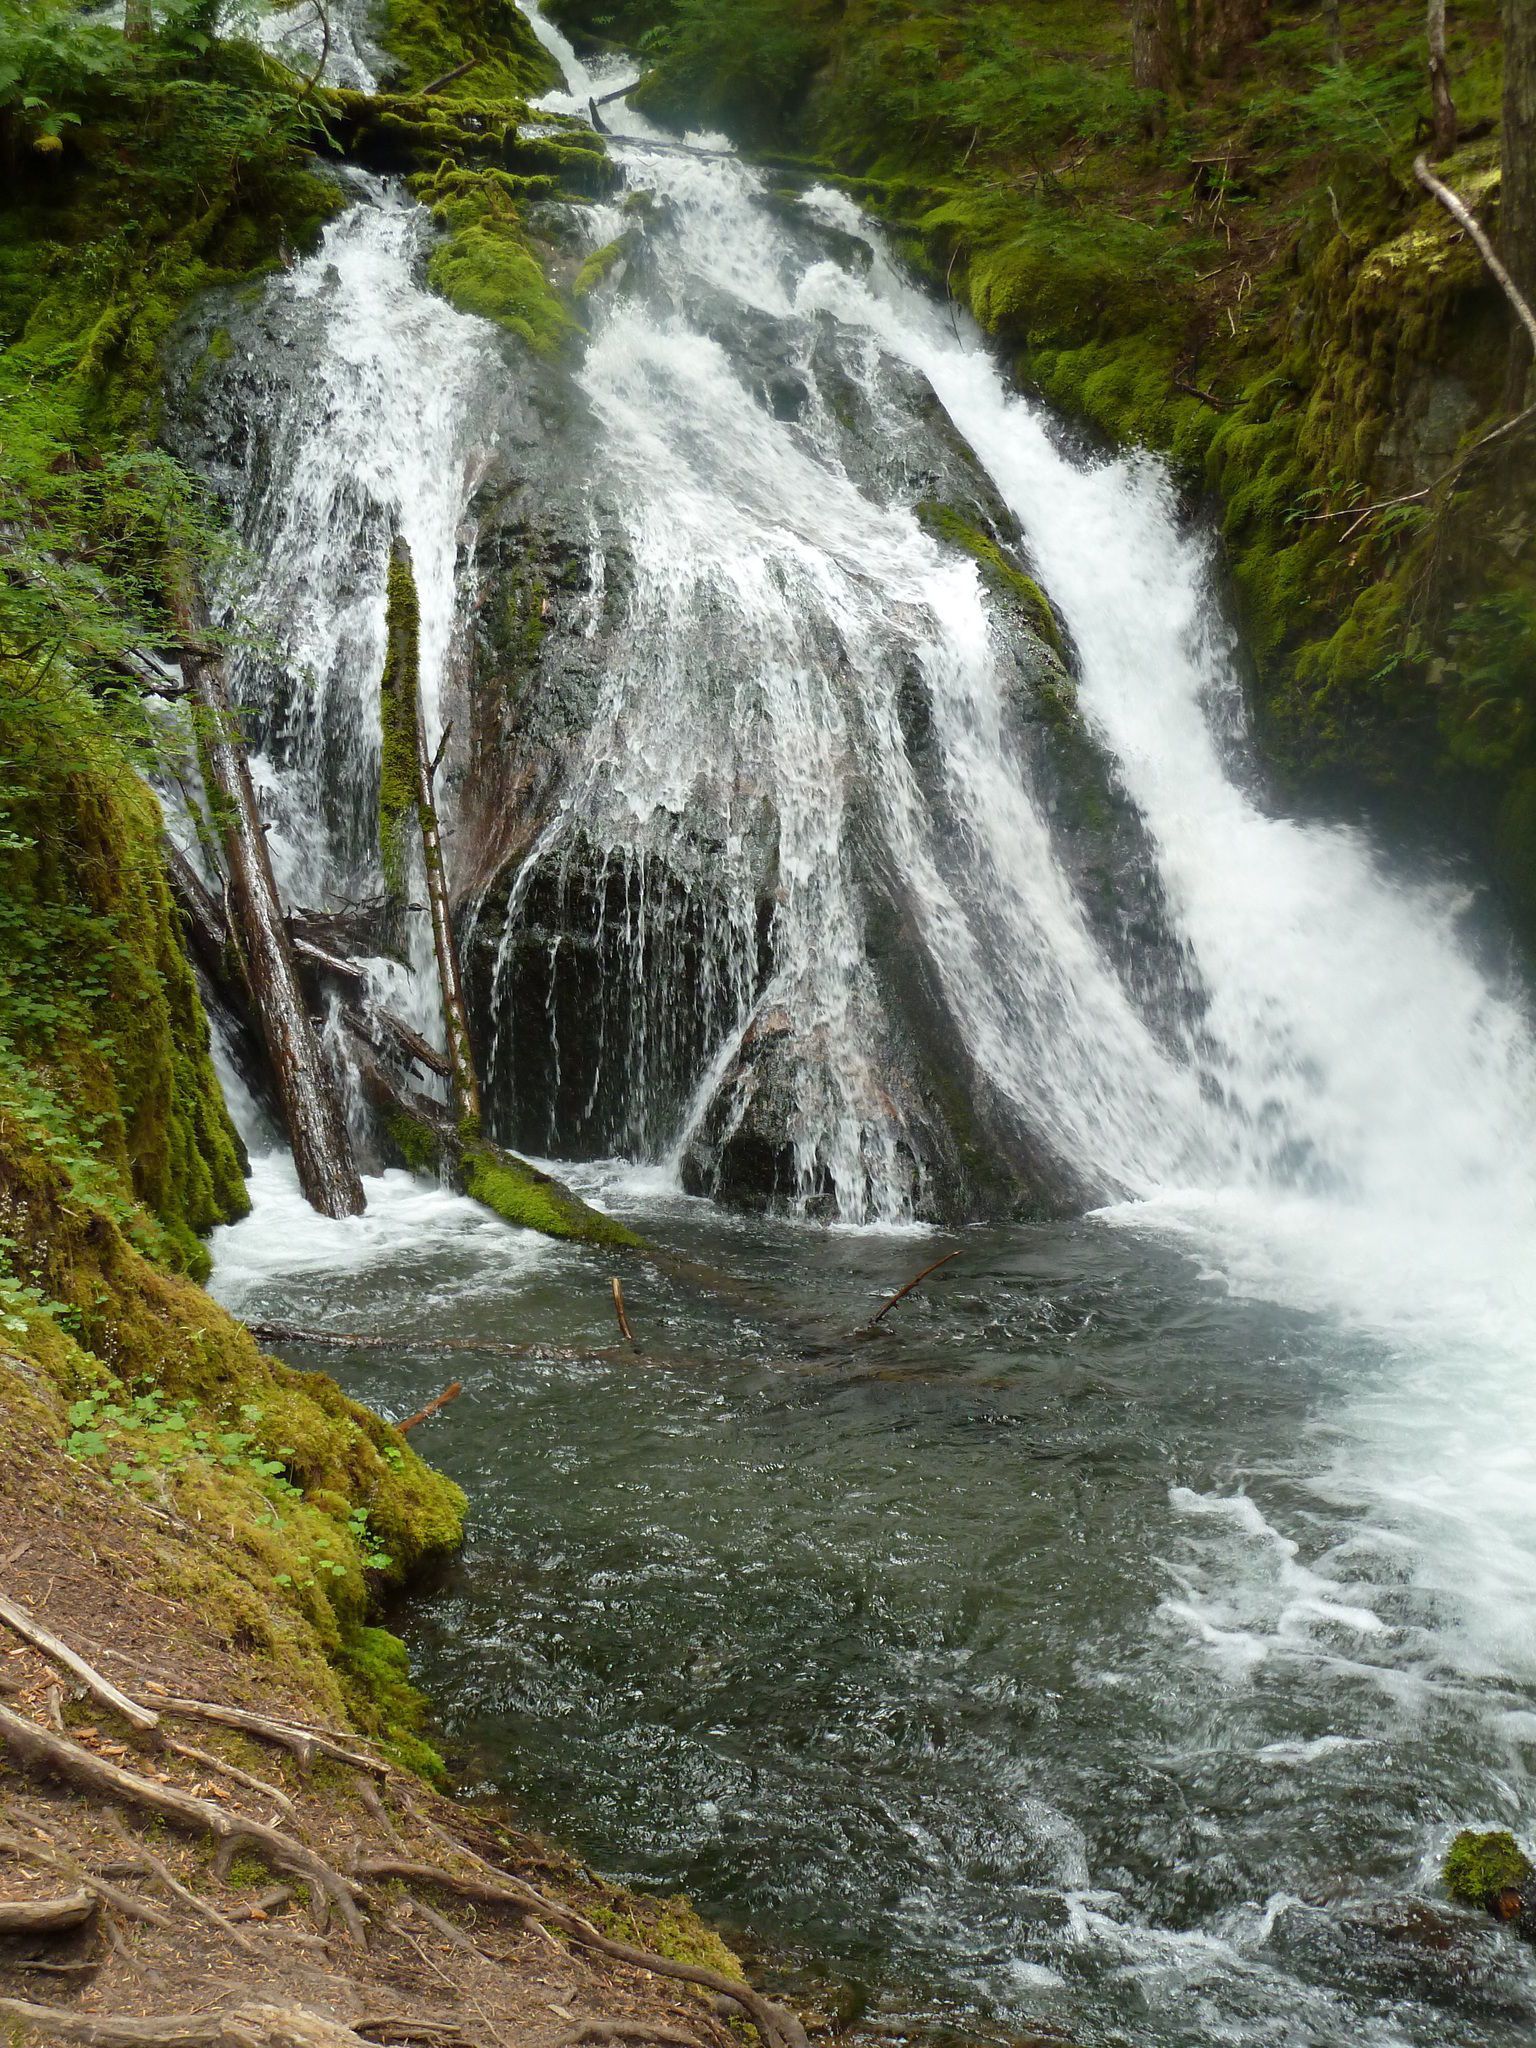 Little Zigzag Falls Trail is a 0.6 mile trail located near ...